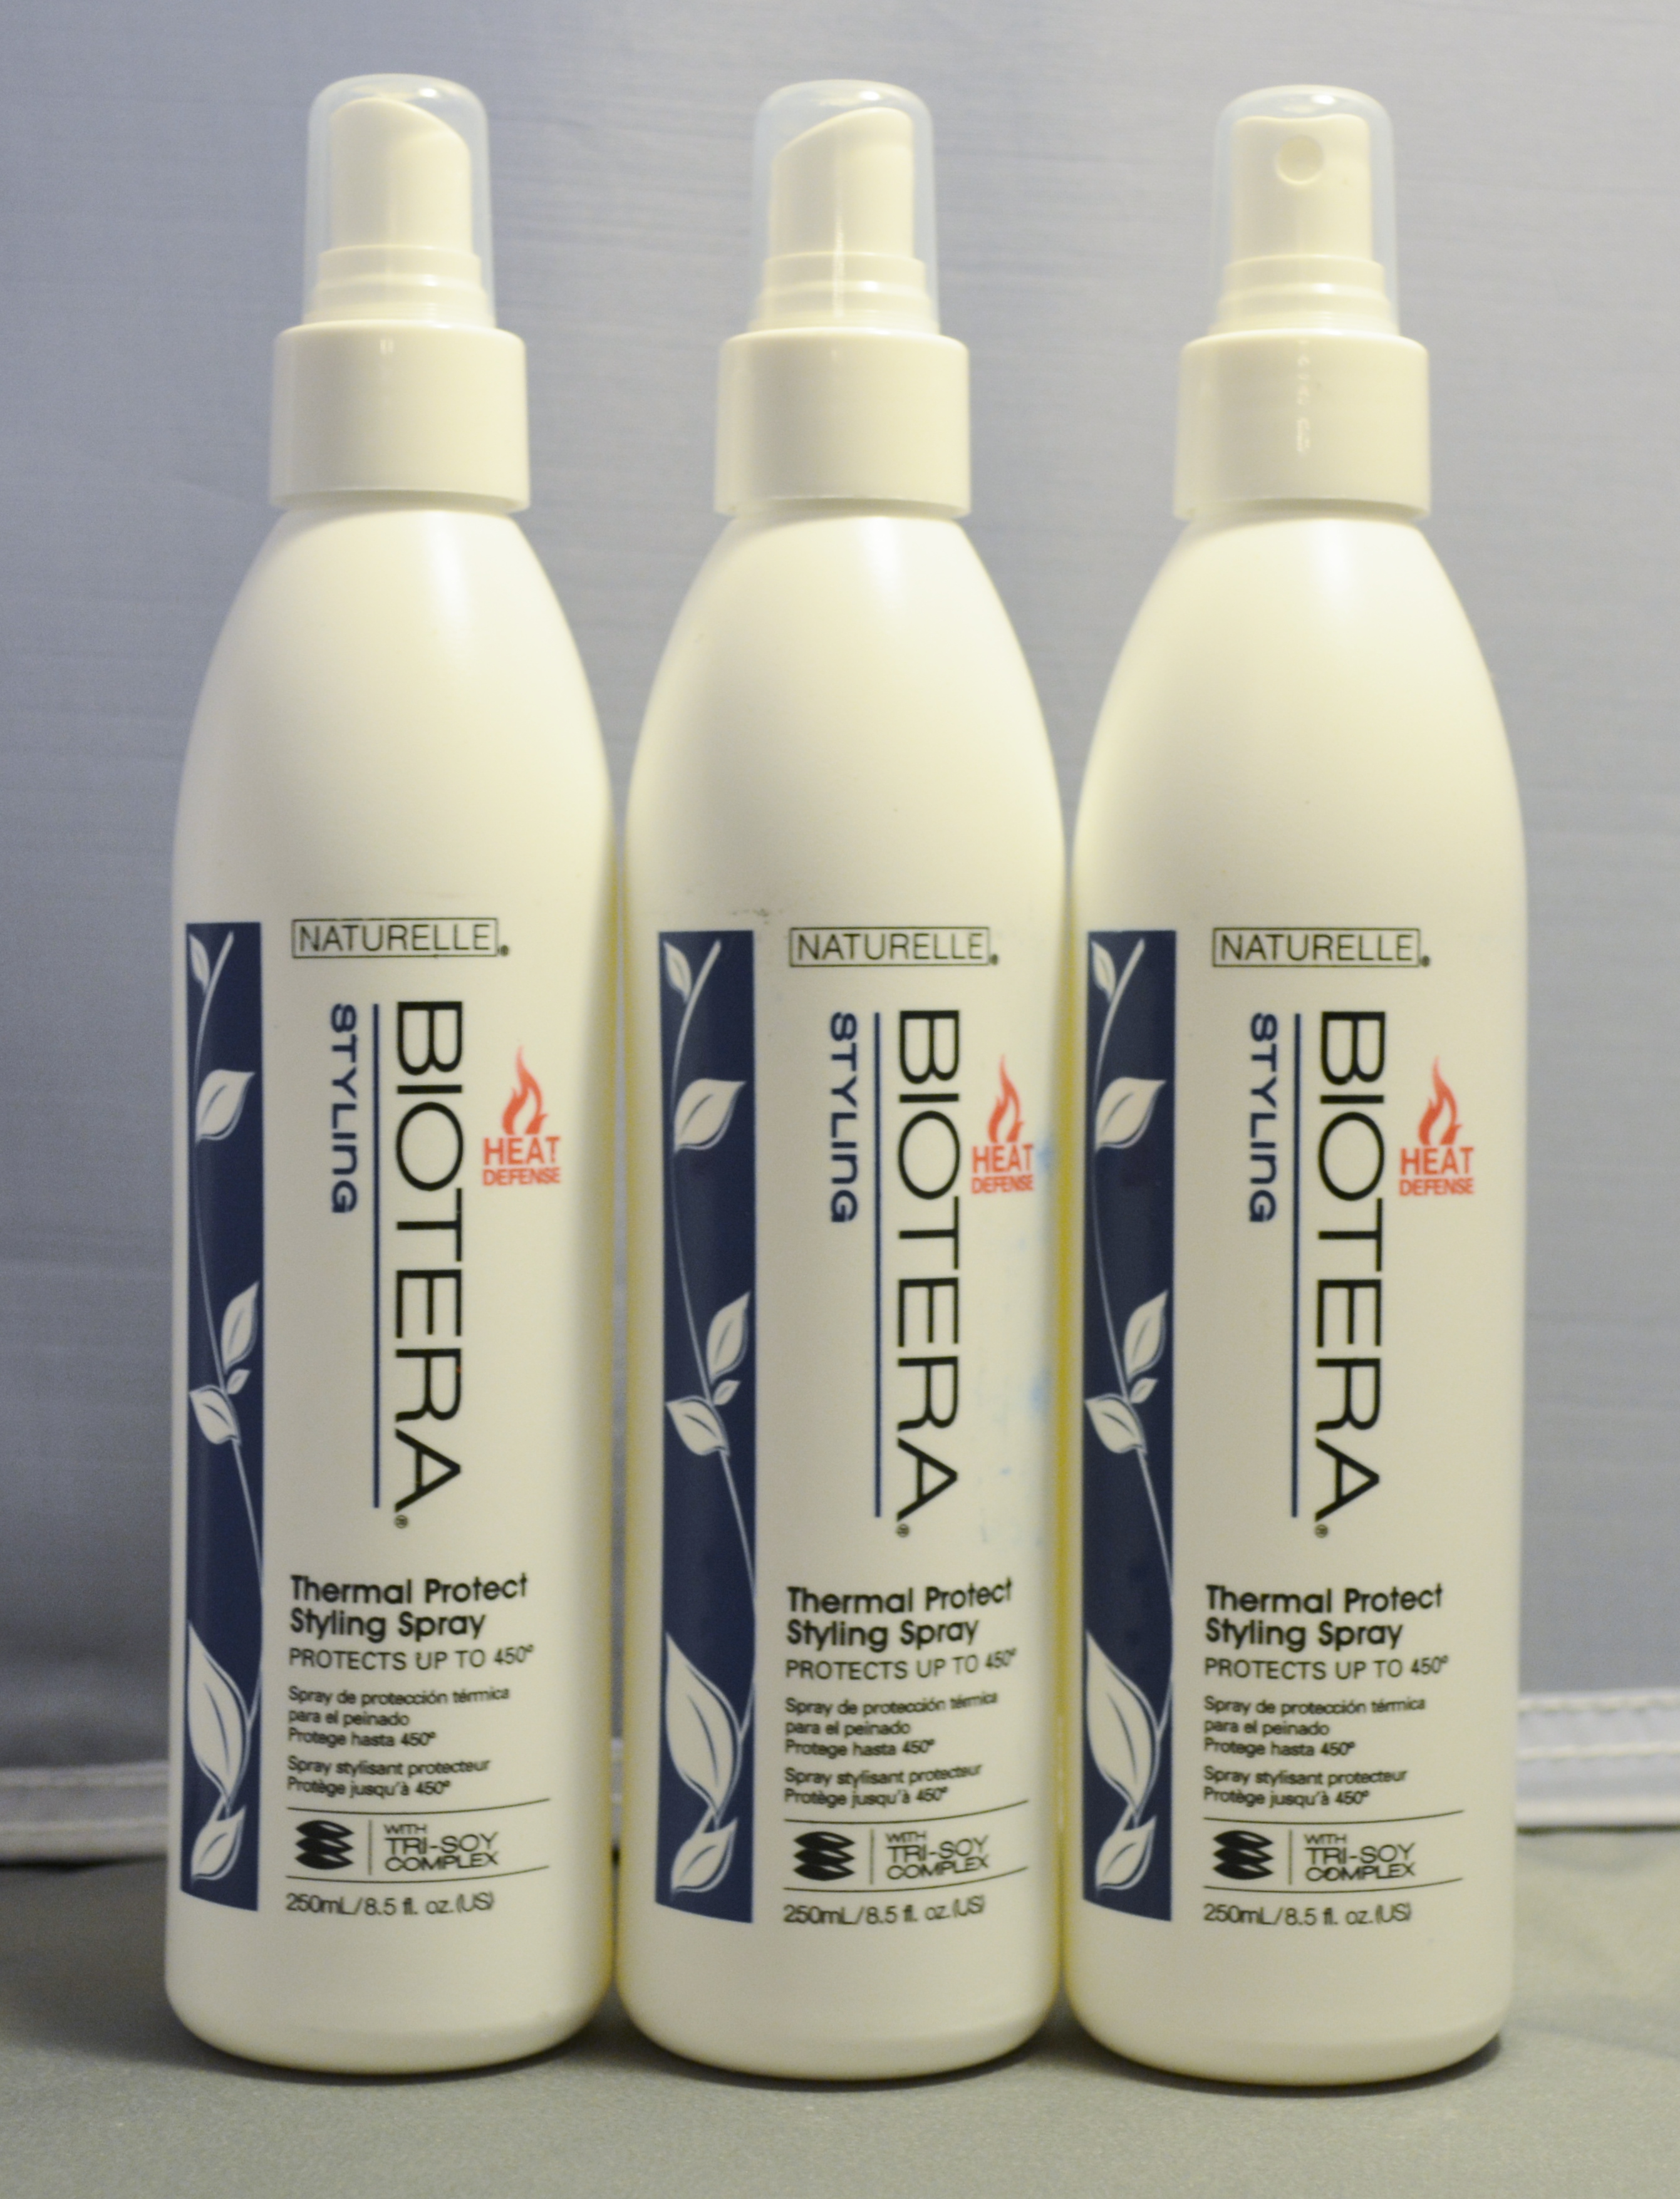 Naturelle Biotera Thermal Protect Styling Spray  oz - 3 pack